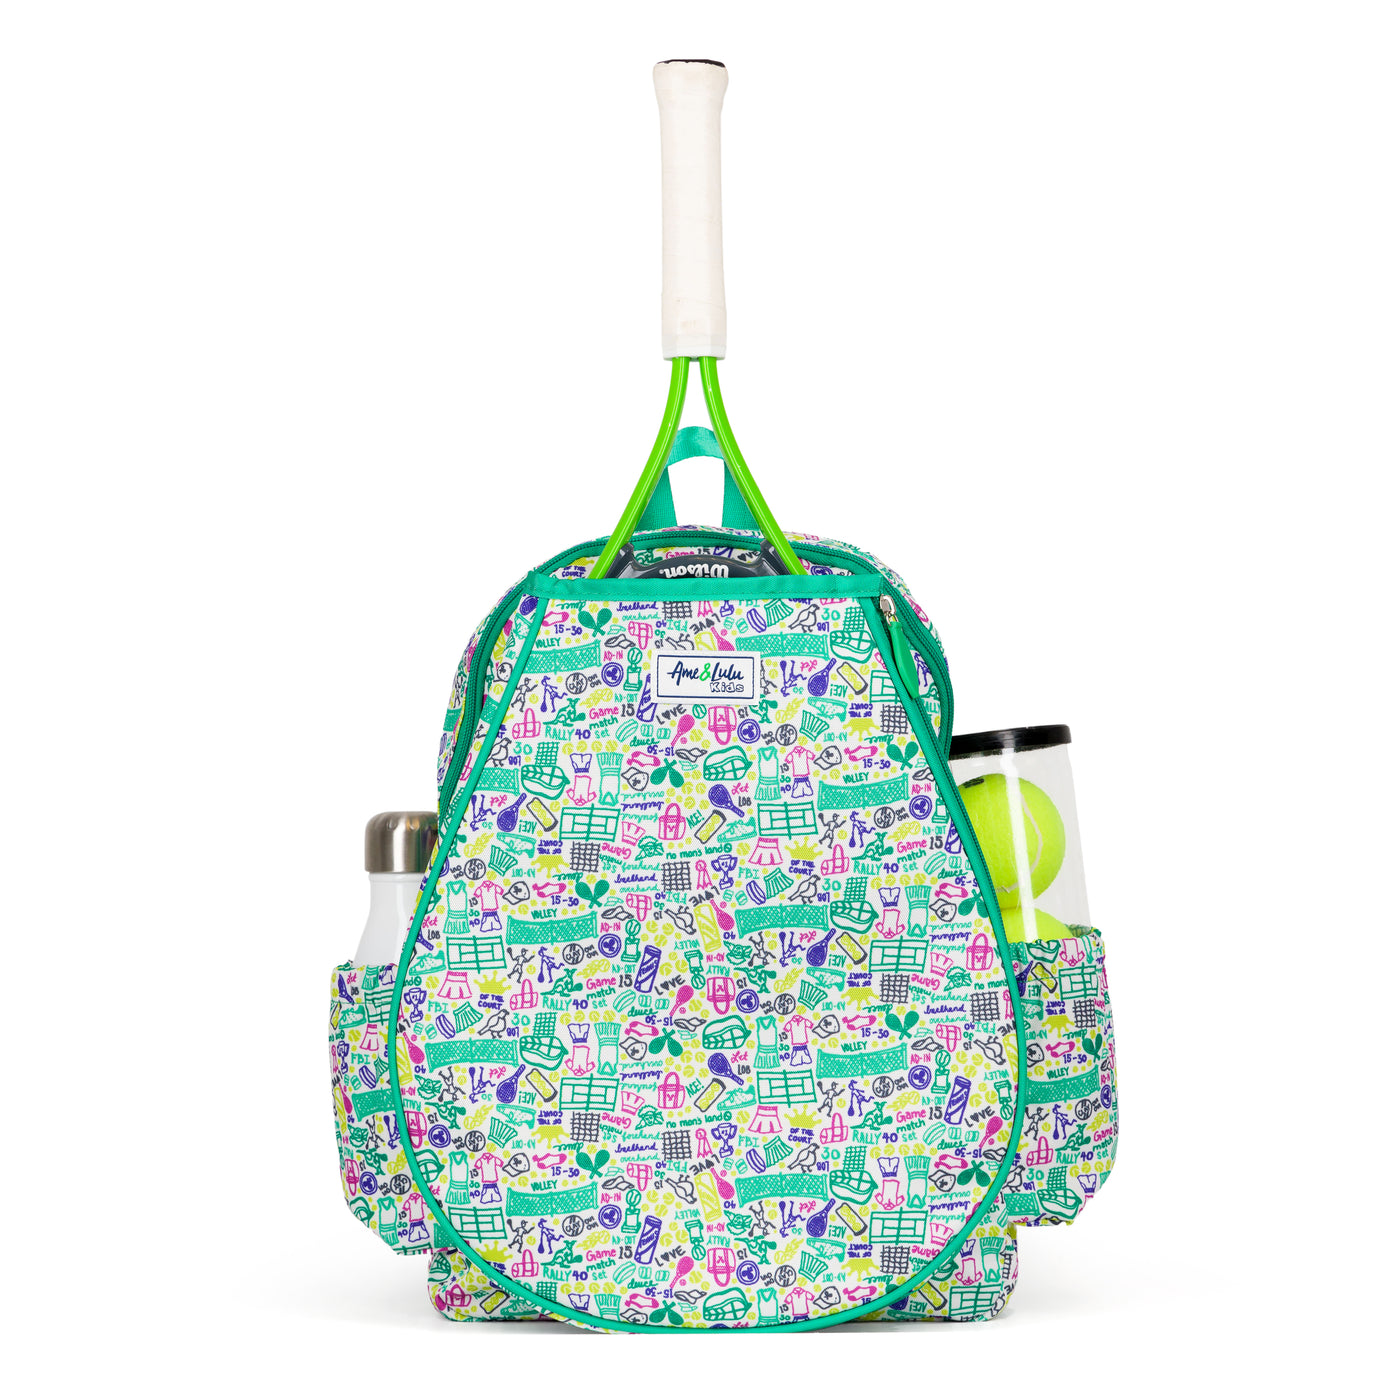 Front view of joy street collab kids tennis backpack. Bag has drawings of tennis balls racquets and nets in green yellow and purple on the bag